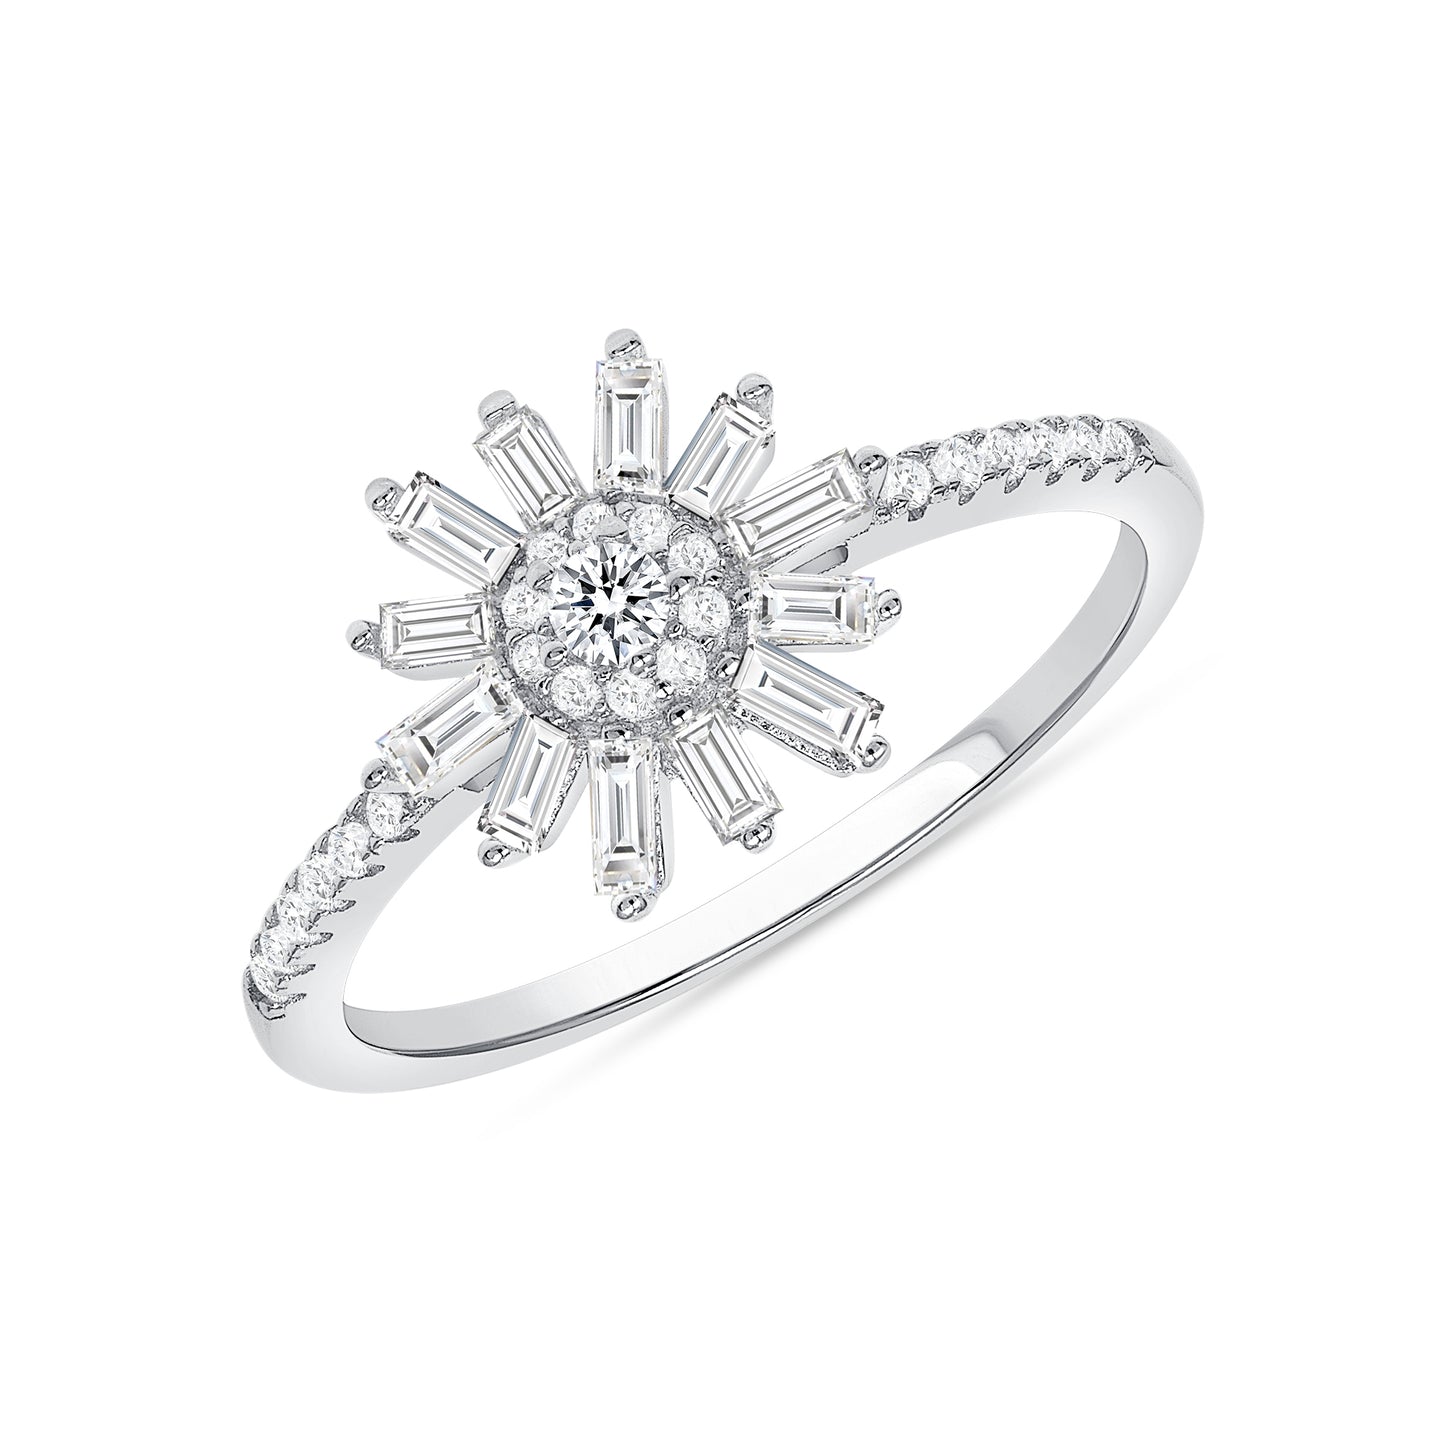 DGR2309. Silver 925 Rhodium Plated Pave Flower Setting Band